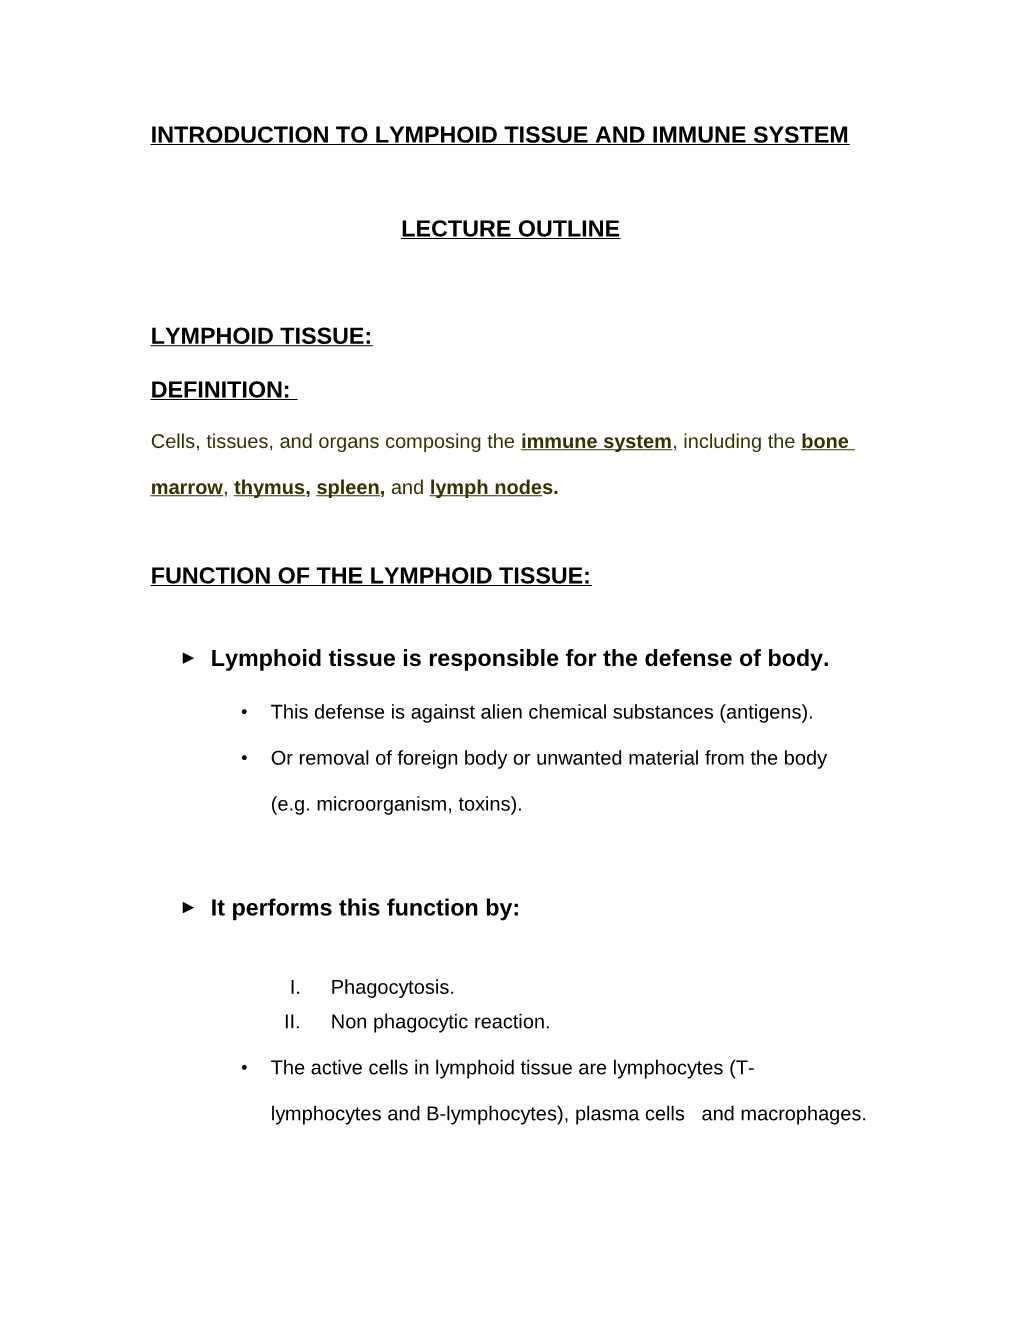 Introduction to Lymphoid Tissue and Immune System